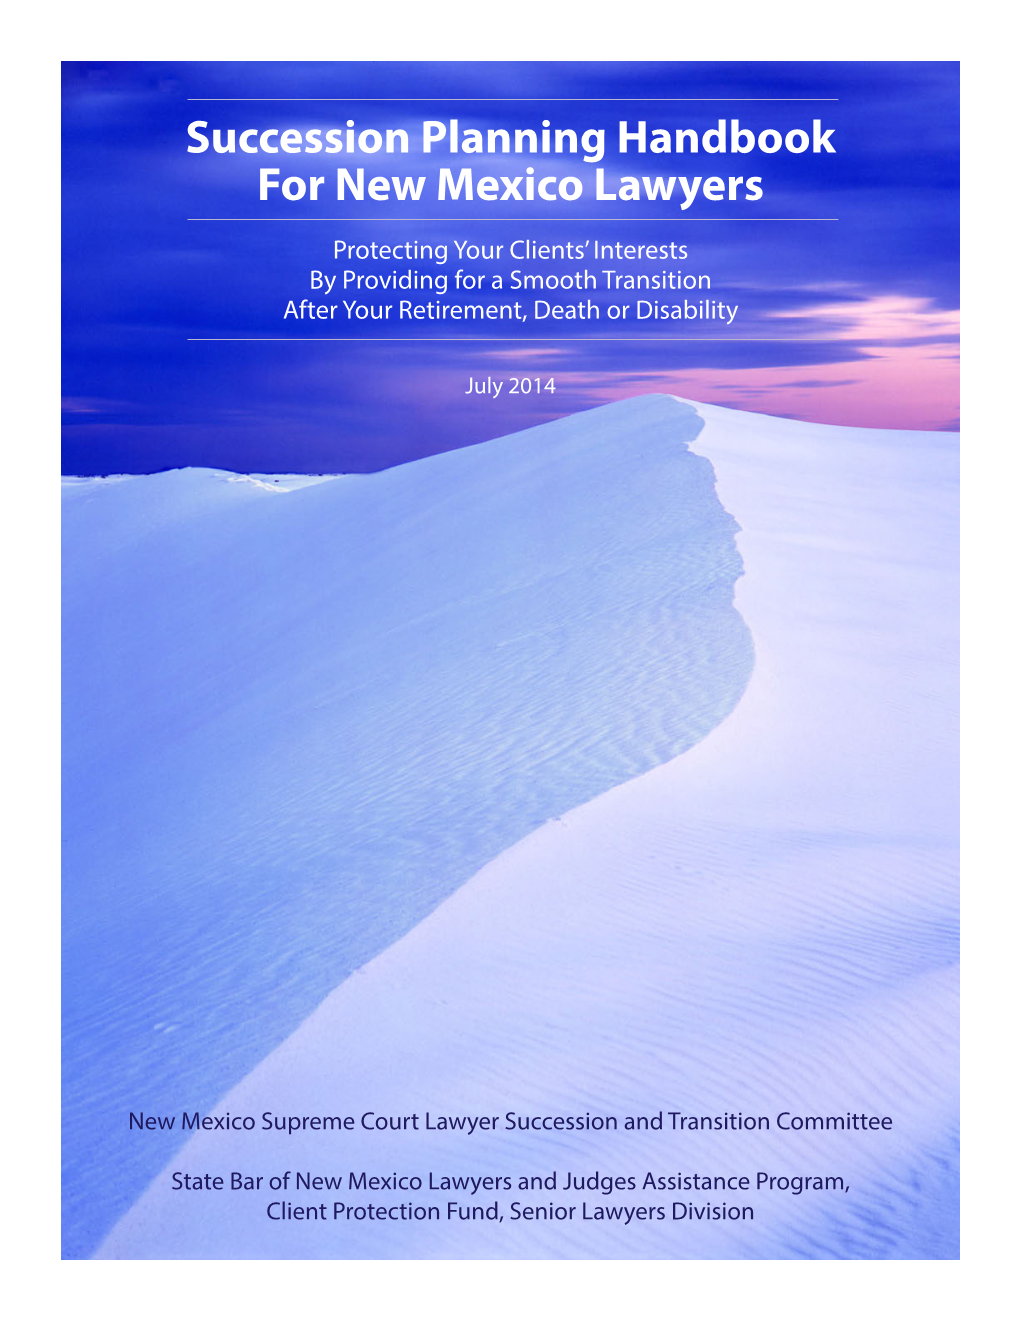 Succession Planning Handbook for New Mexico Lawyers